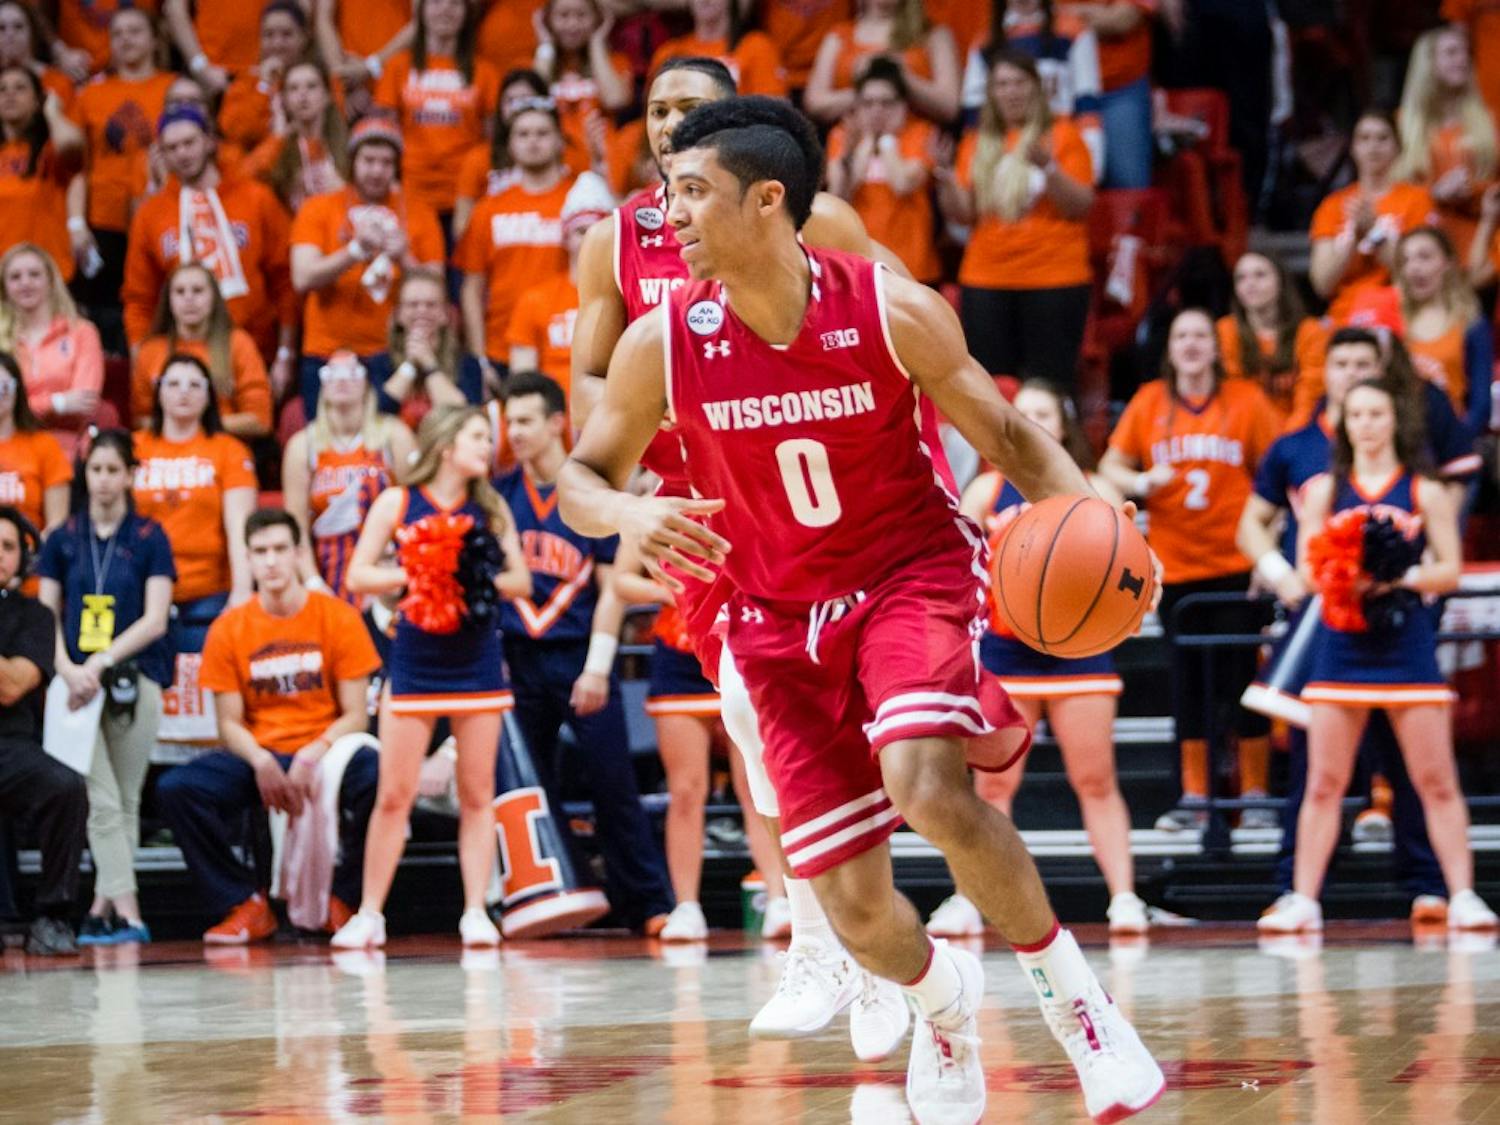 Wisconsin's D'Mitrik Trice (0) brings the ball down the court during the game against Illinois at State Farm Center on Tuesday, January 31.